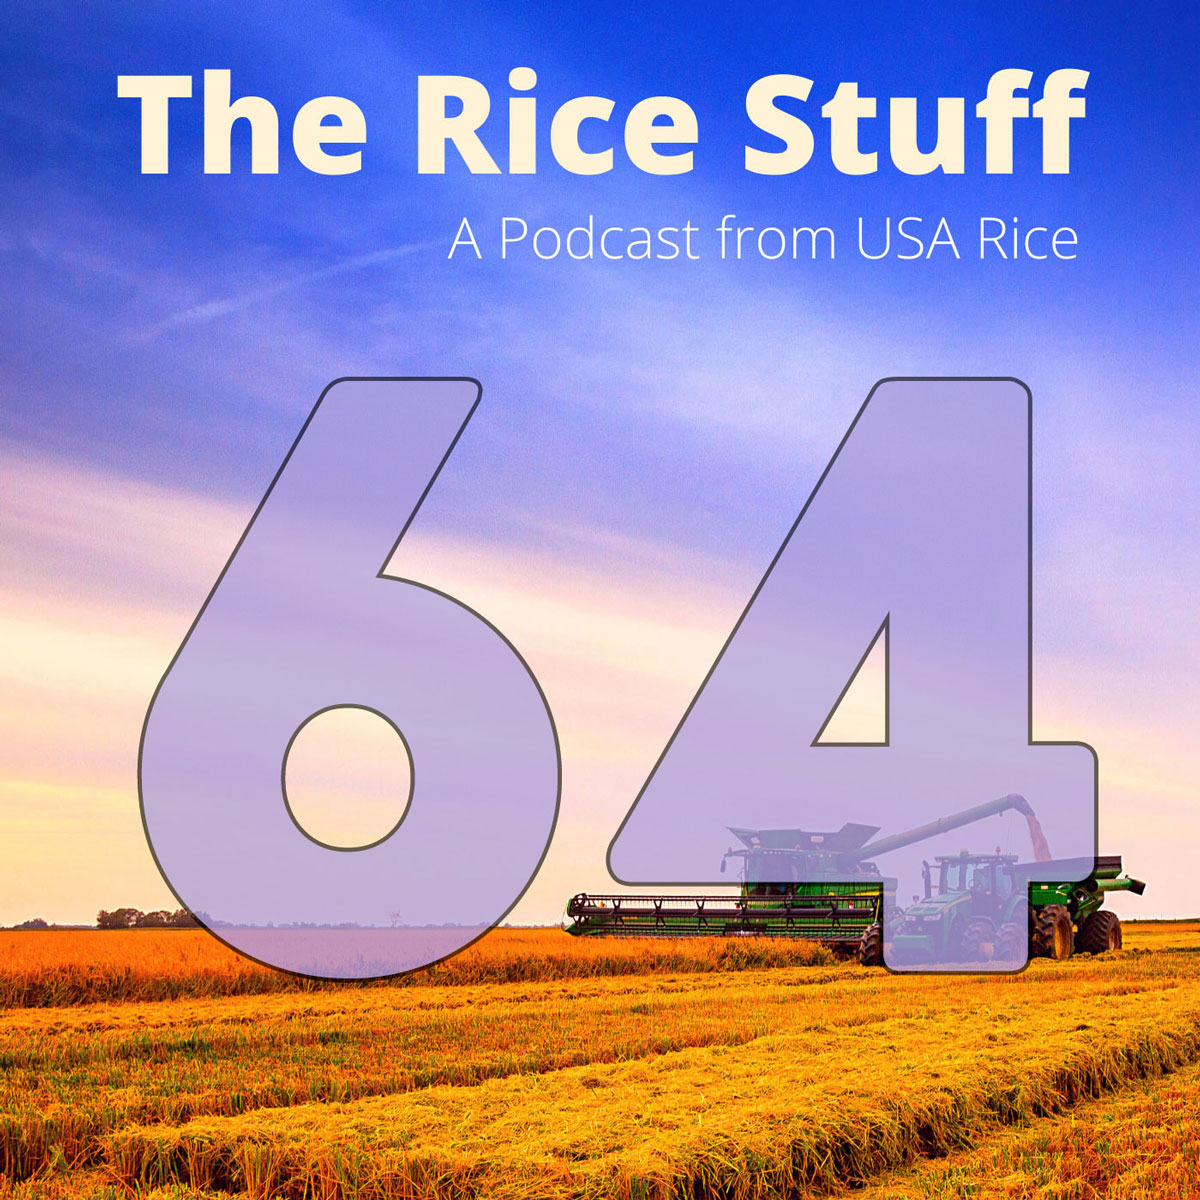 Number 64 superimposed over photo of combine and grain cart in mature rice field